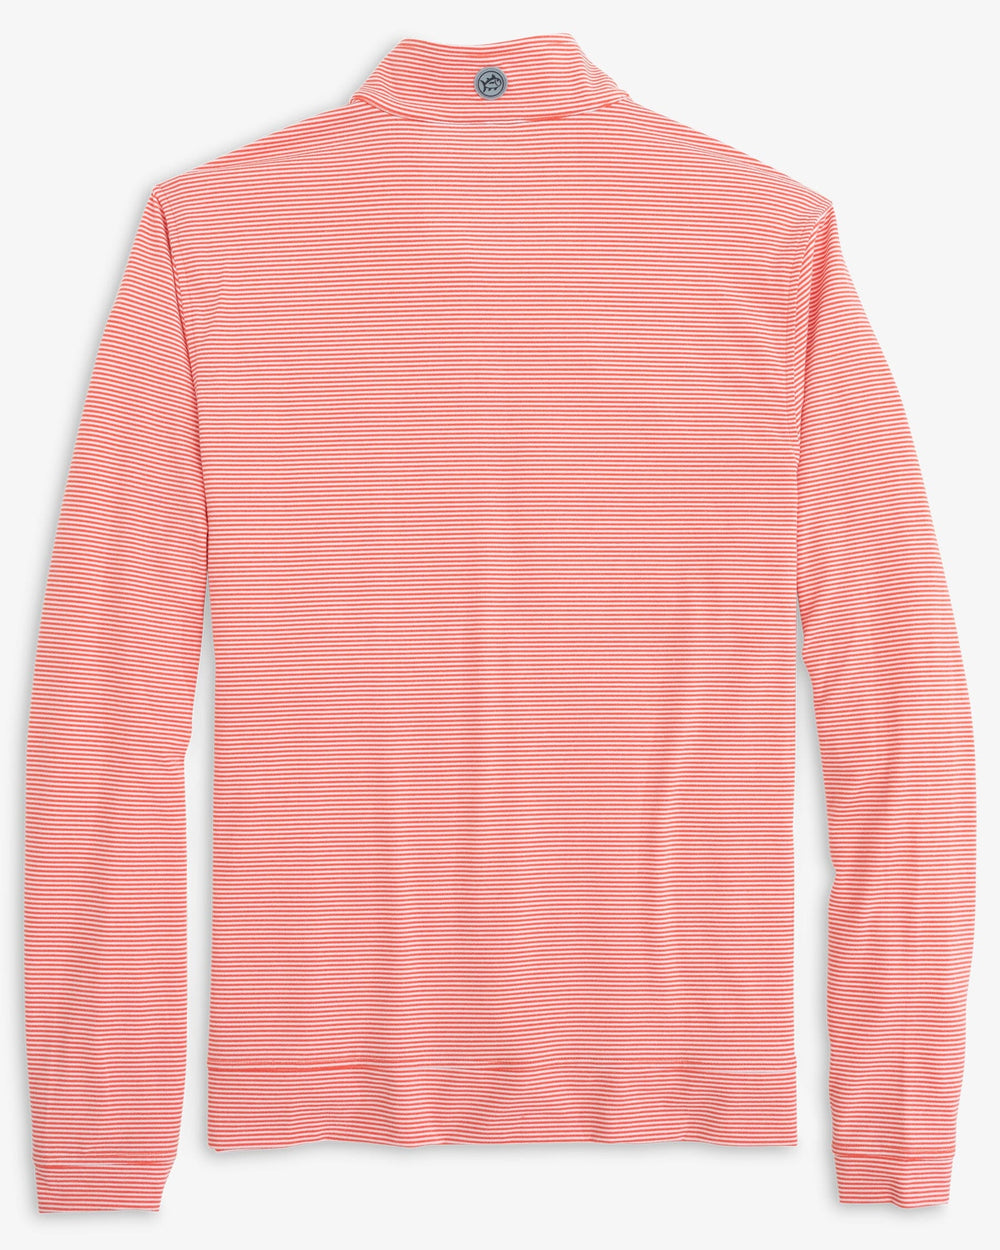 The back view of the Clemson Tigers Cruiser Micro-Stripe Heather Quarter Zip by Southern Tide - Heather Endzone Orange